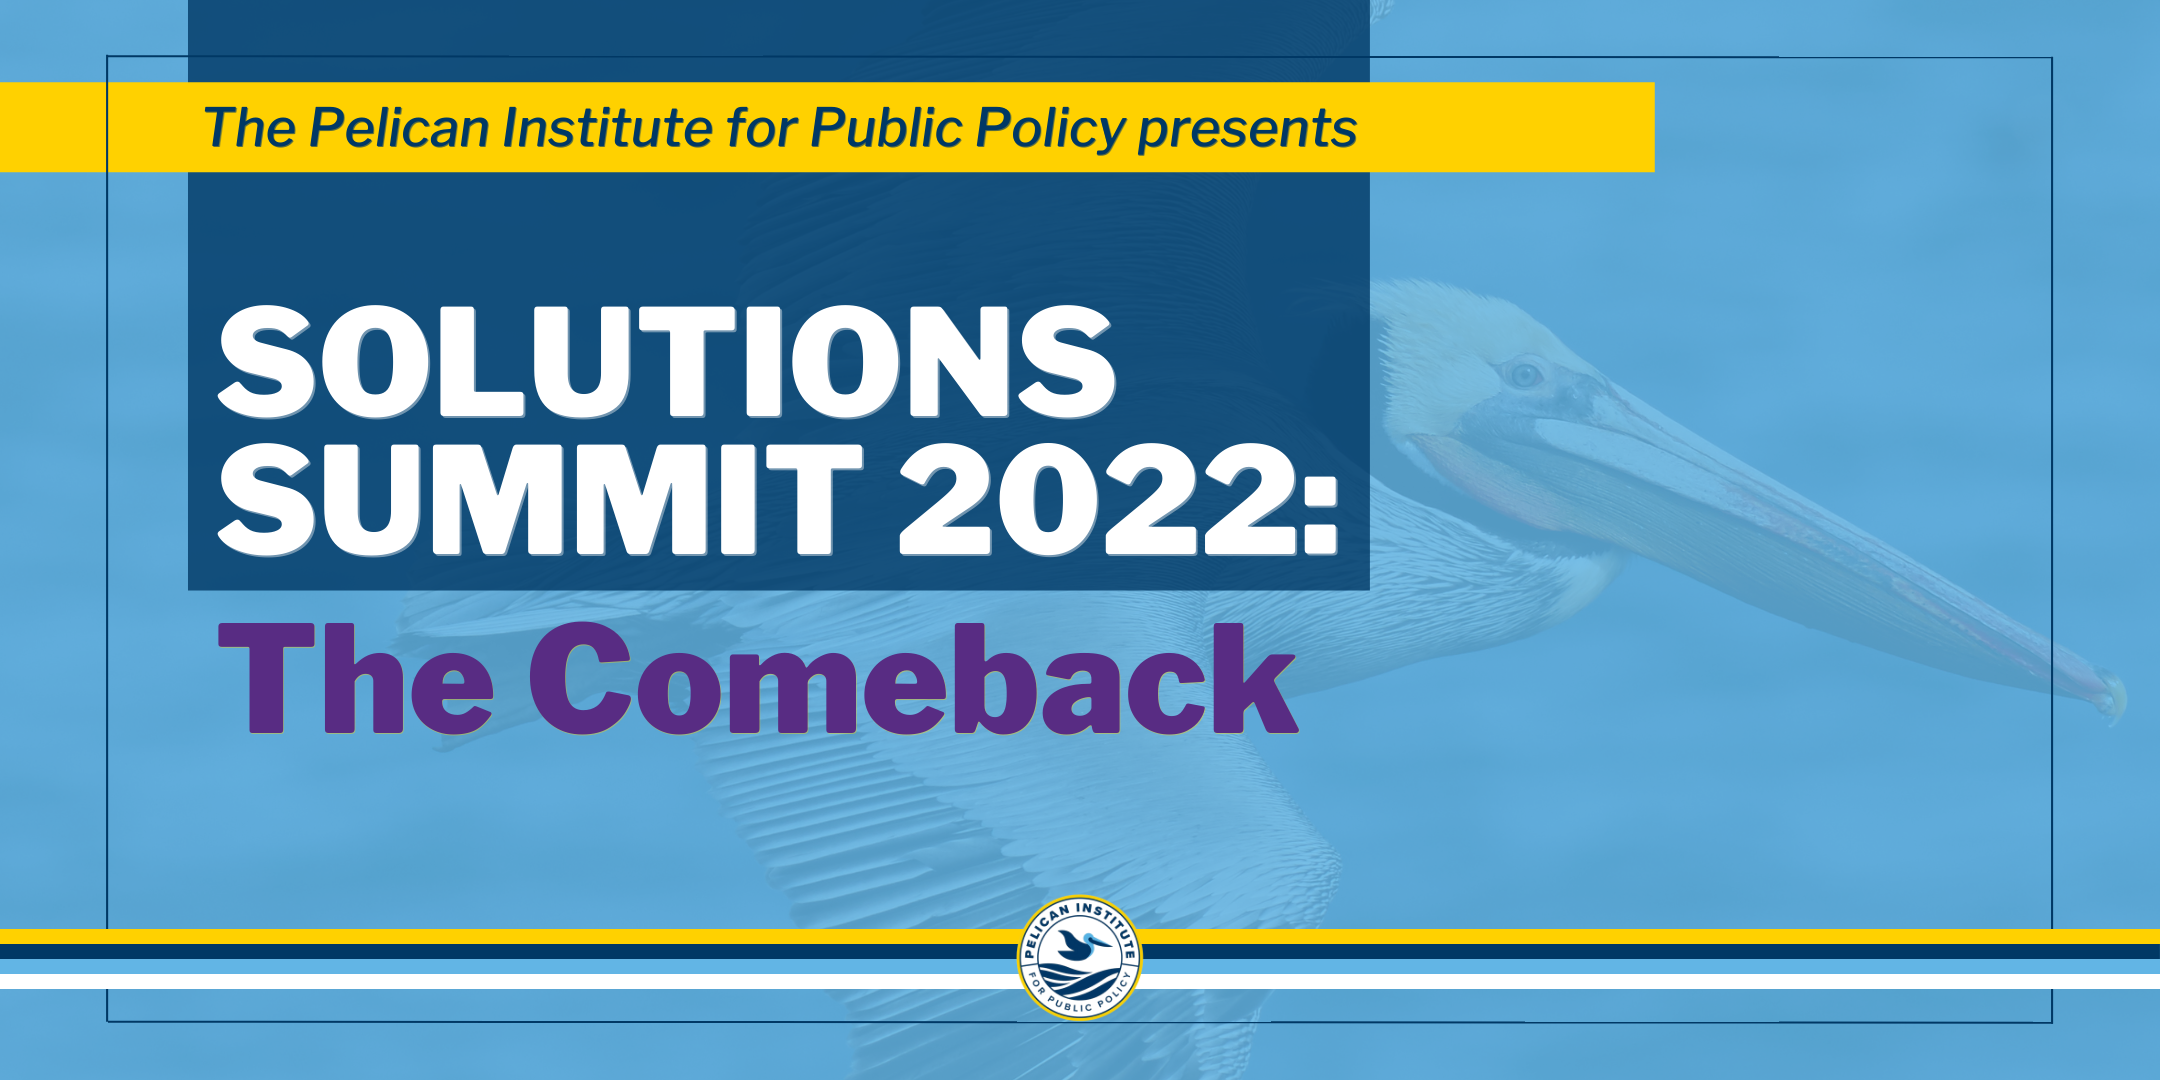 Register Now for Solutions Summit 2022: The Comeback